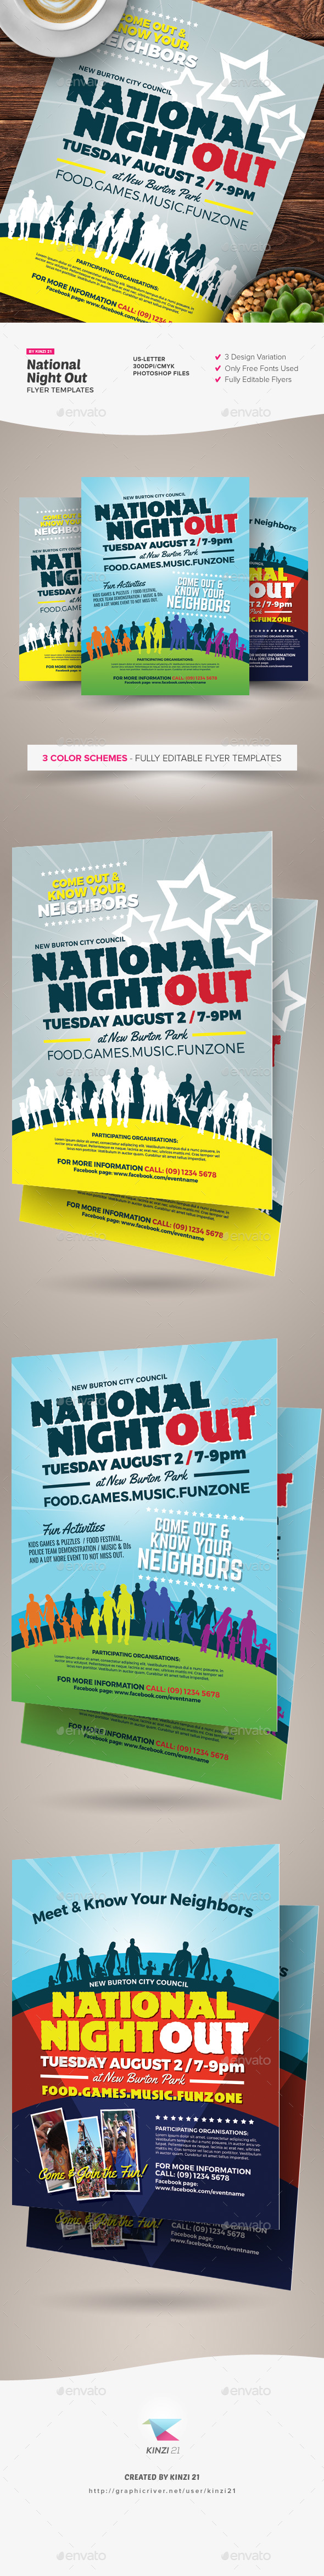 National Night Out Flyer Templates For National Night Out Flyer Template